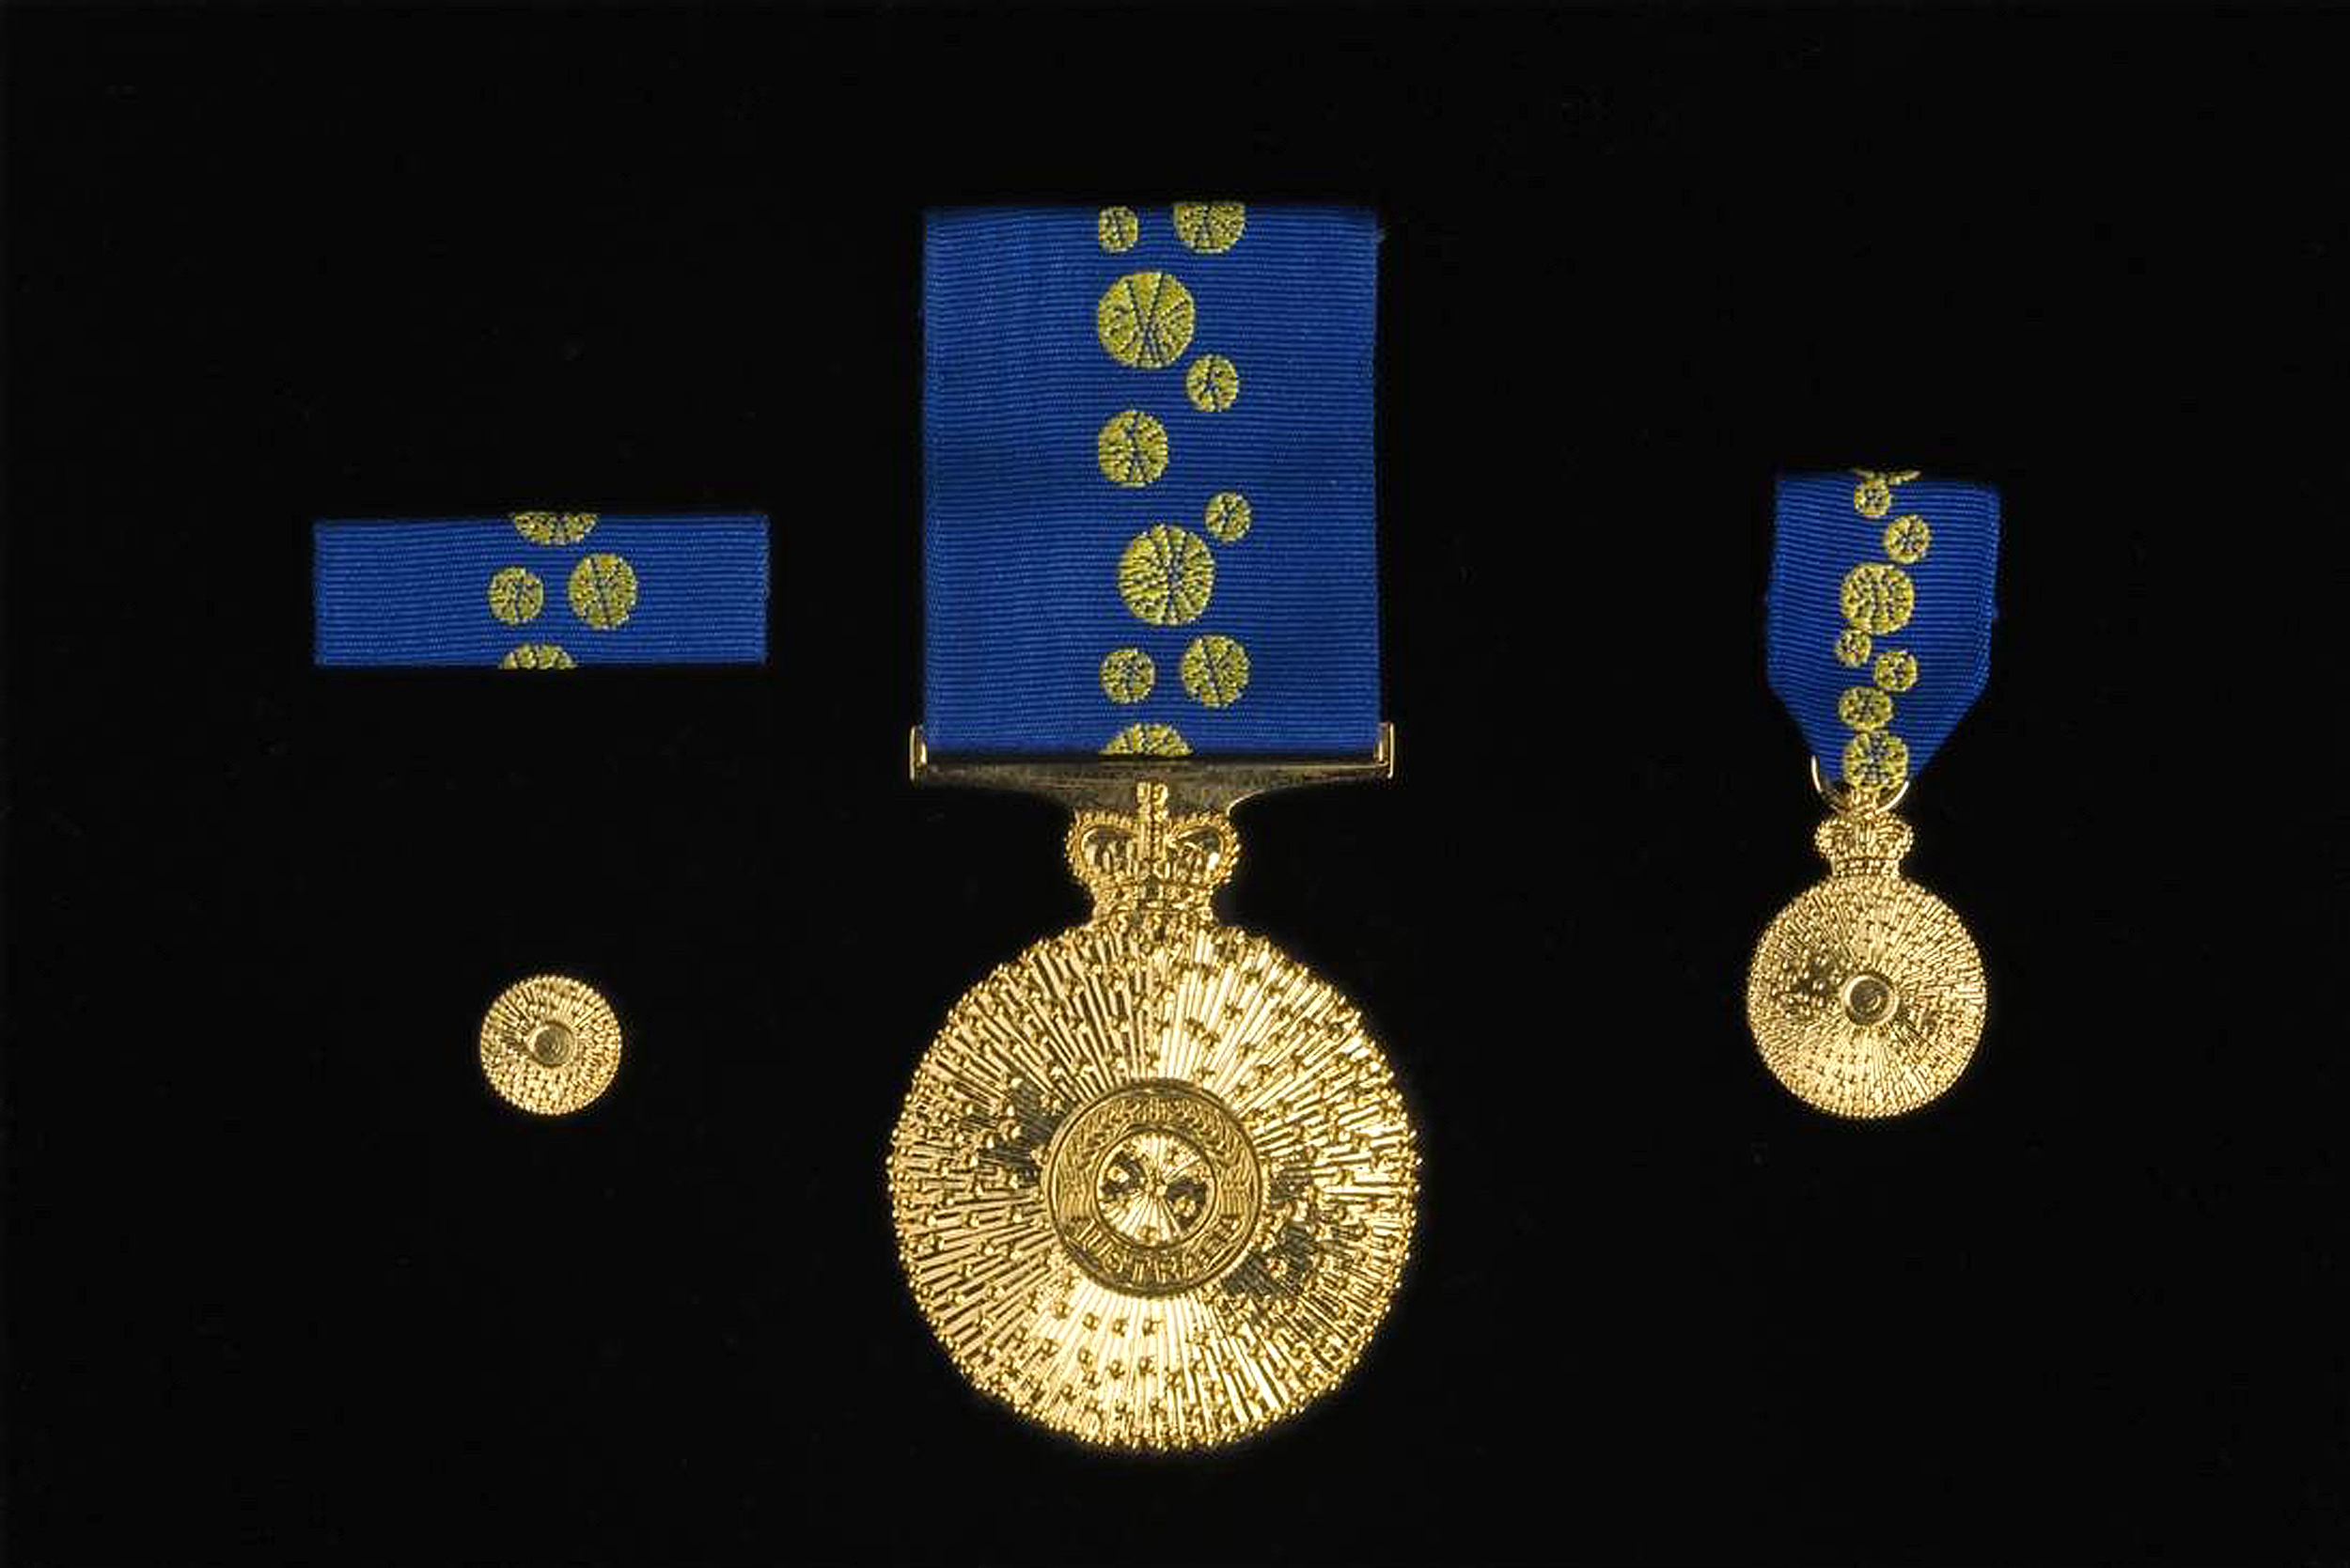  The Order of Australia. The insignia and ribbon are designed around a wattle blossom. Image courtesy of the National Museum of Australia. 